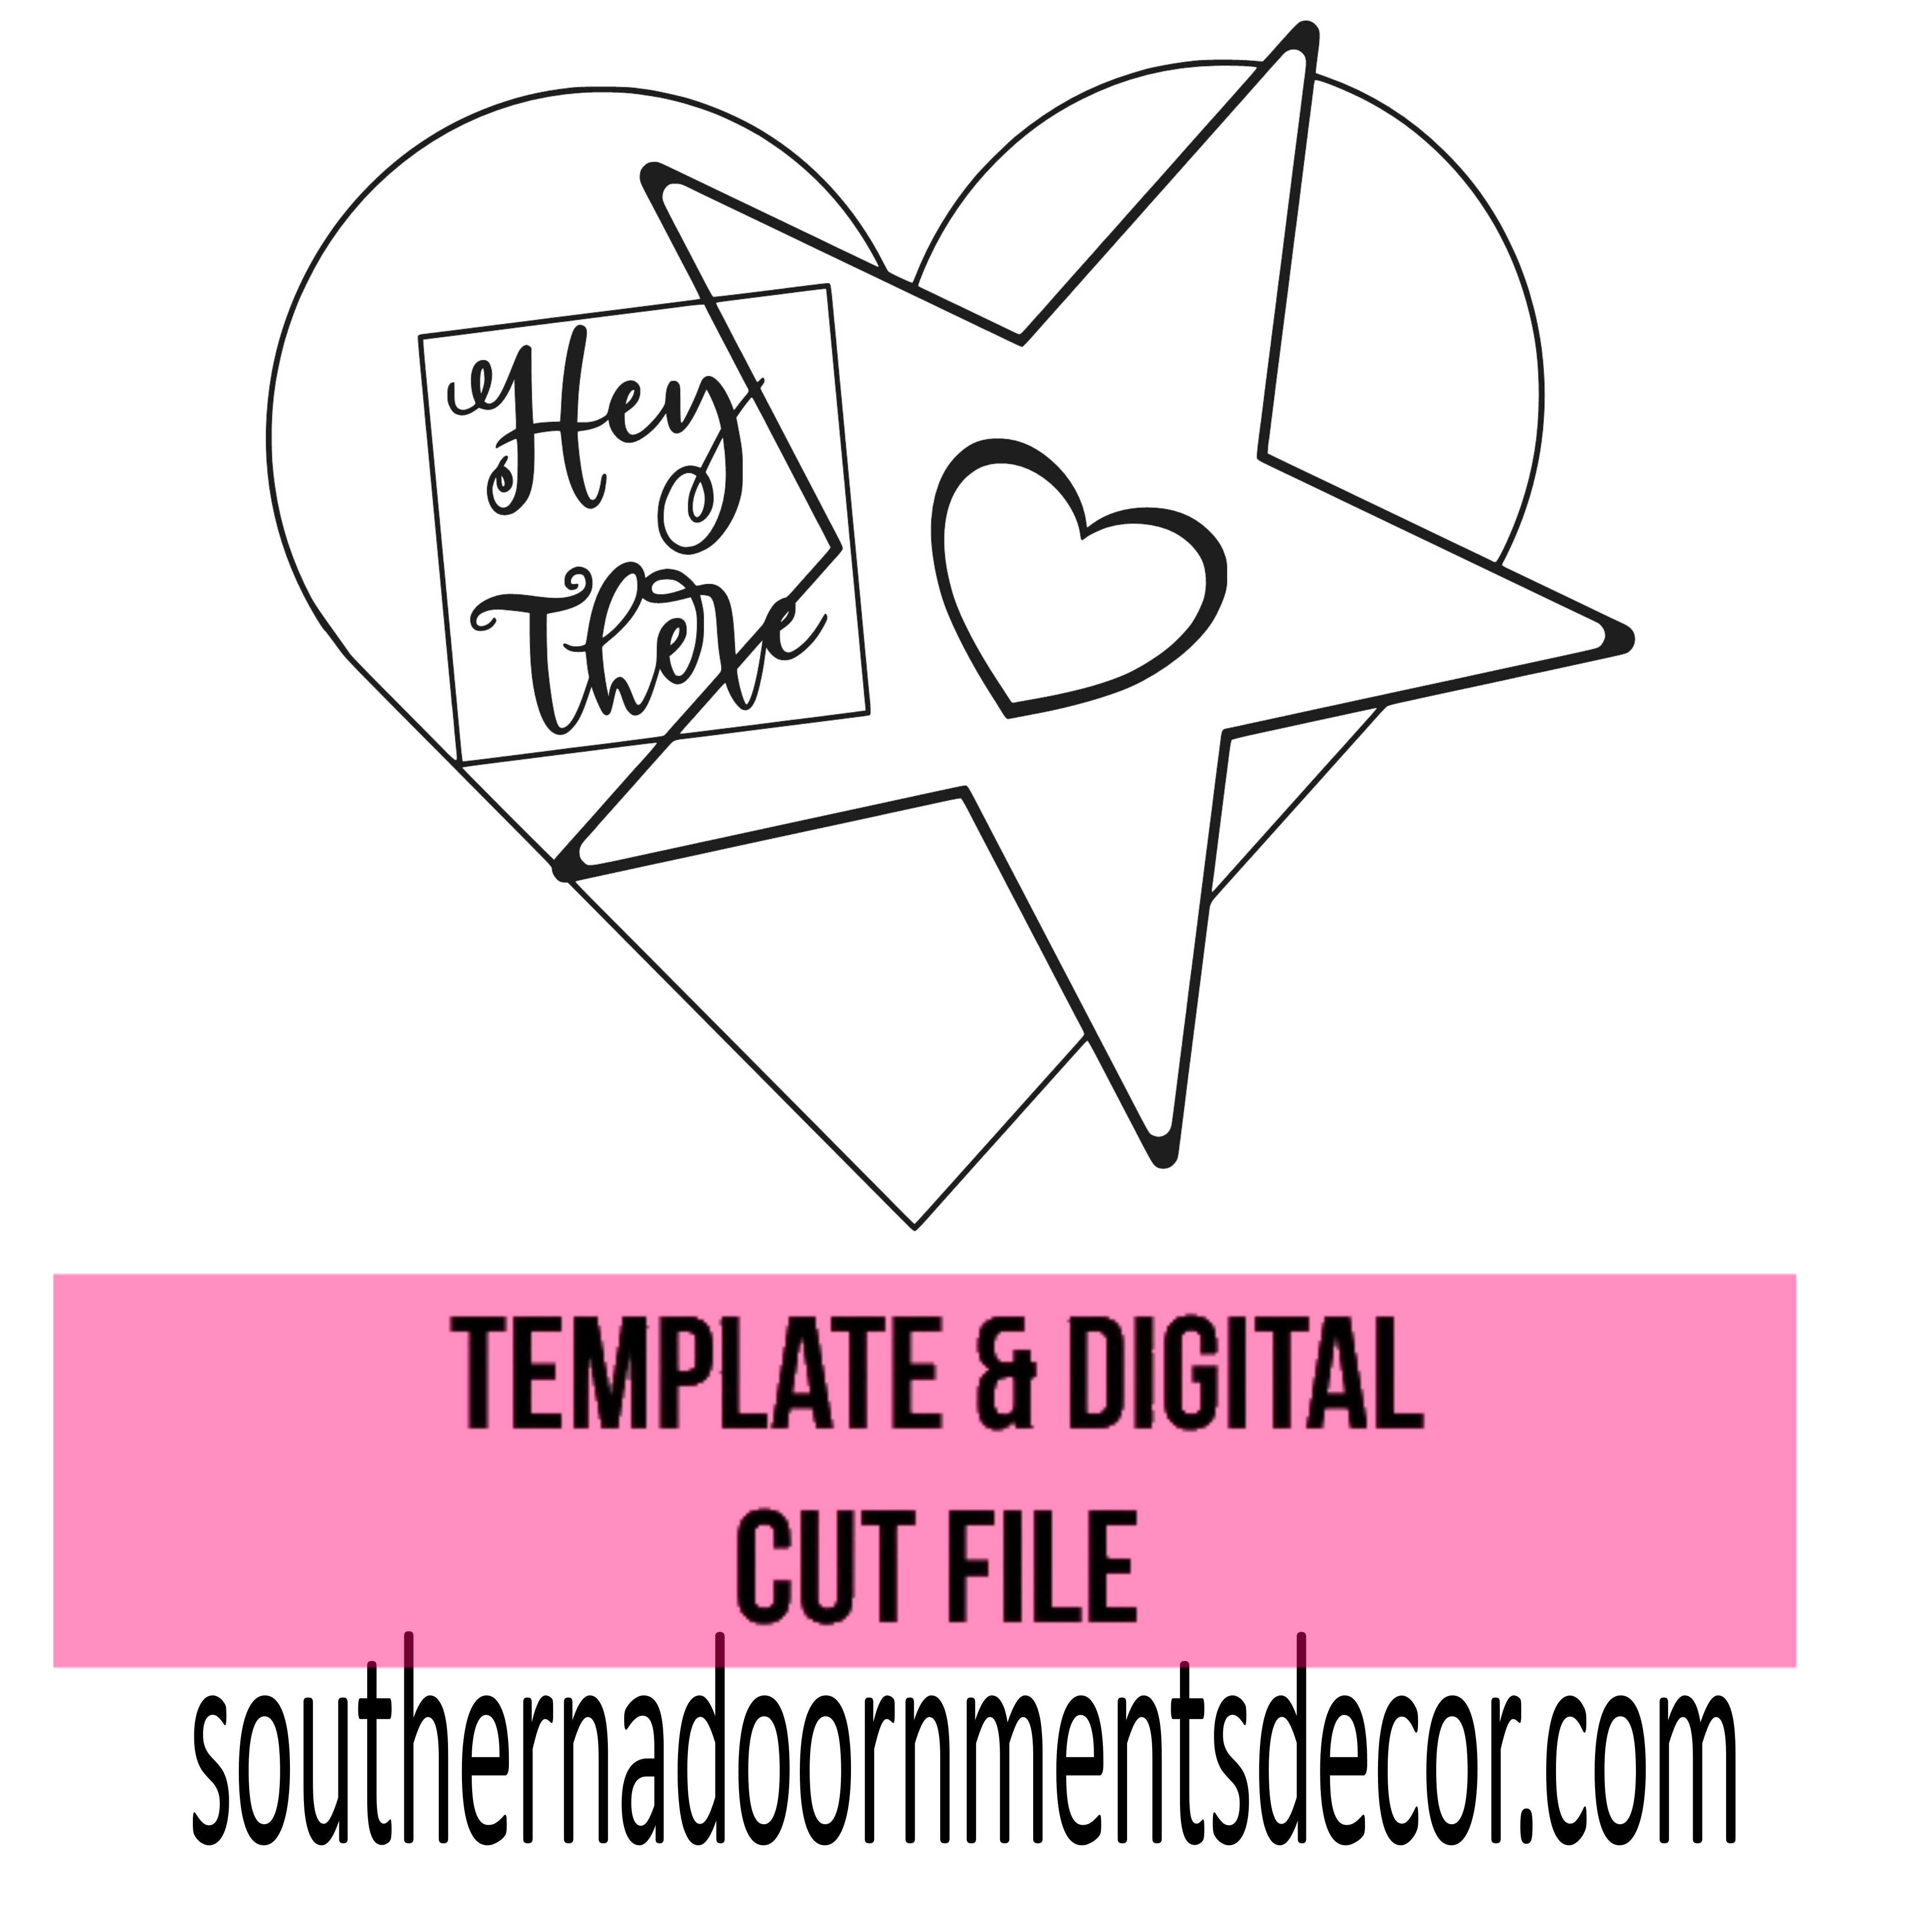 Hey There with star and heart Template & Digital Cut File